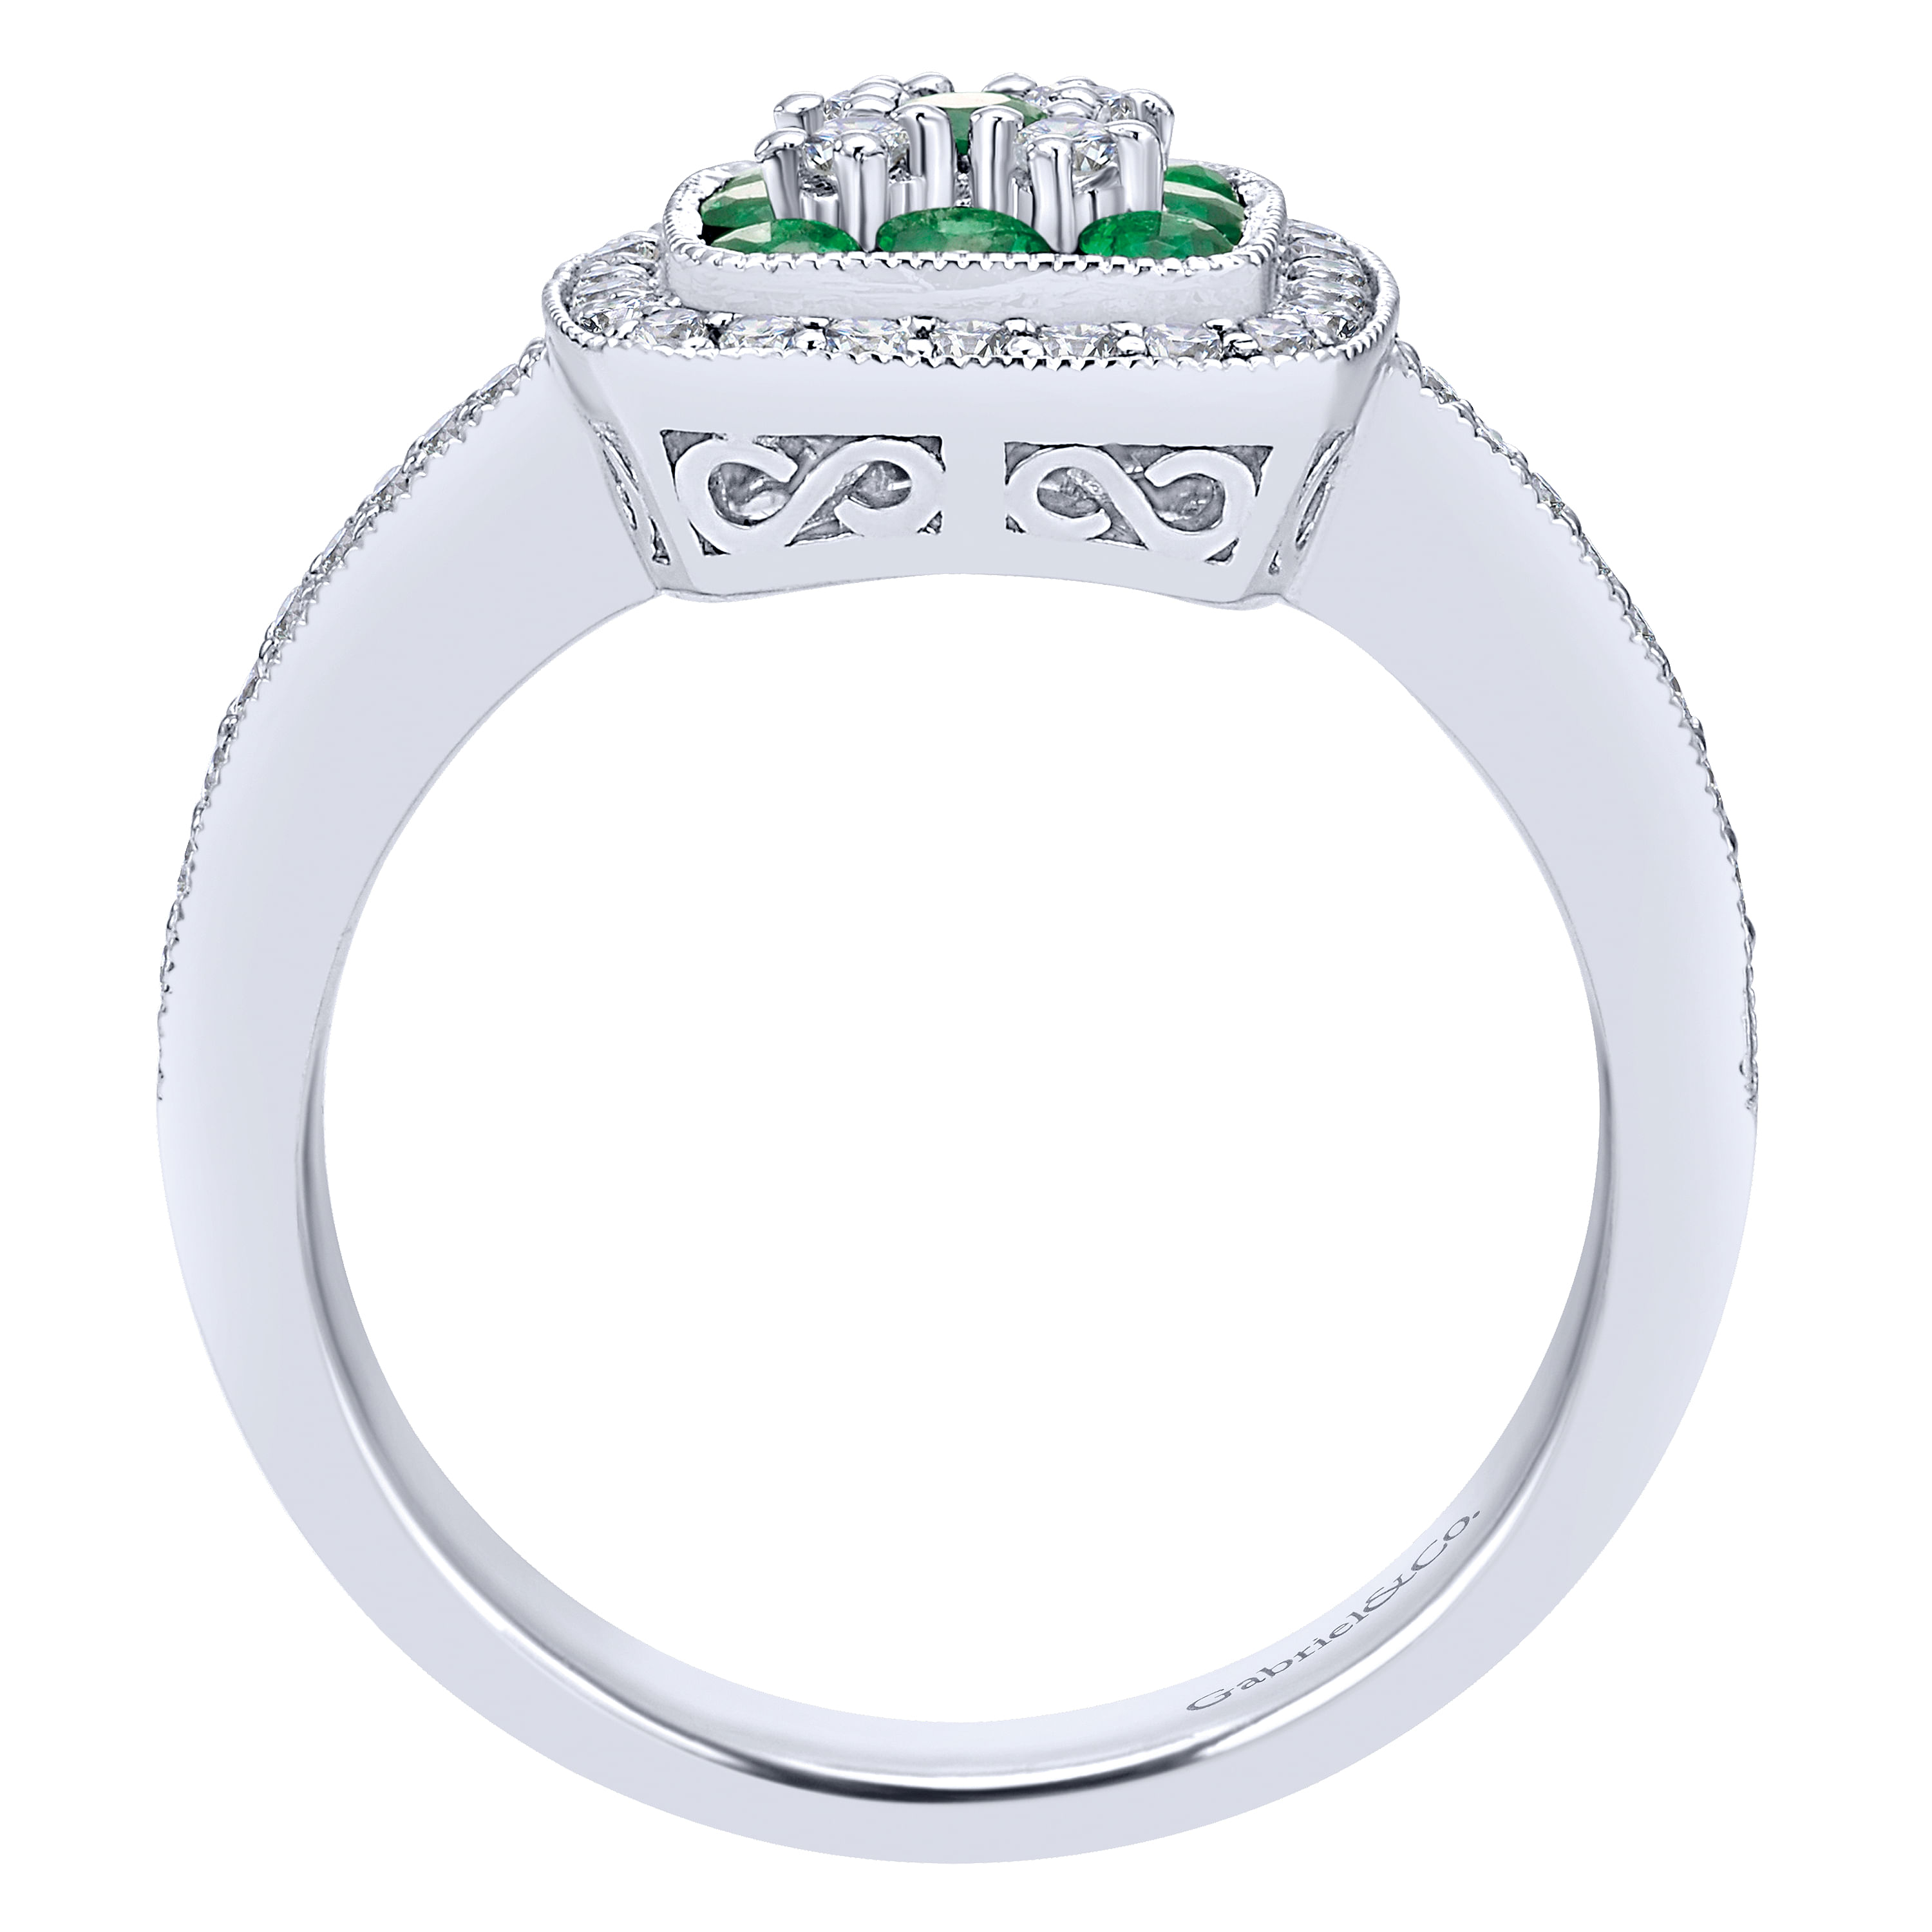 14K White Gold Cushion Shape Cluster Ring with Emerald and Diamond